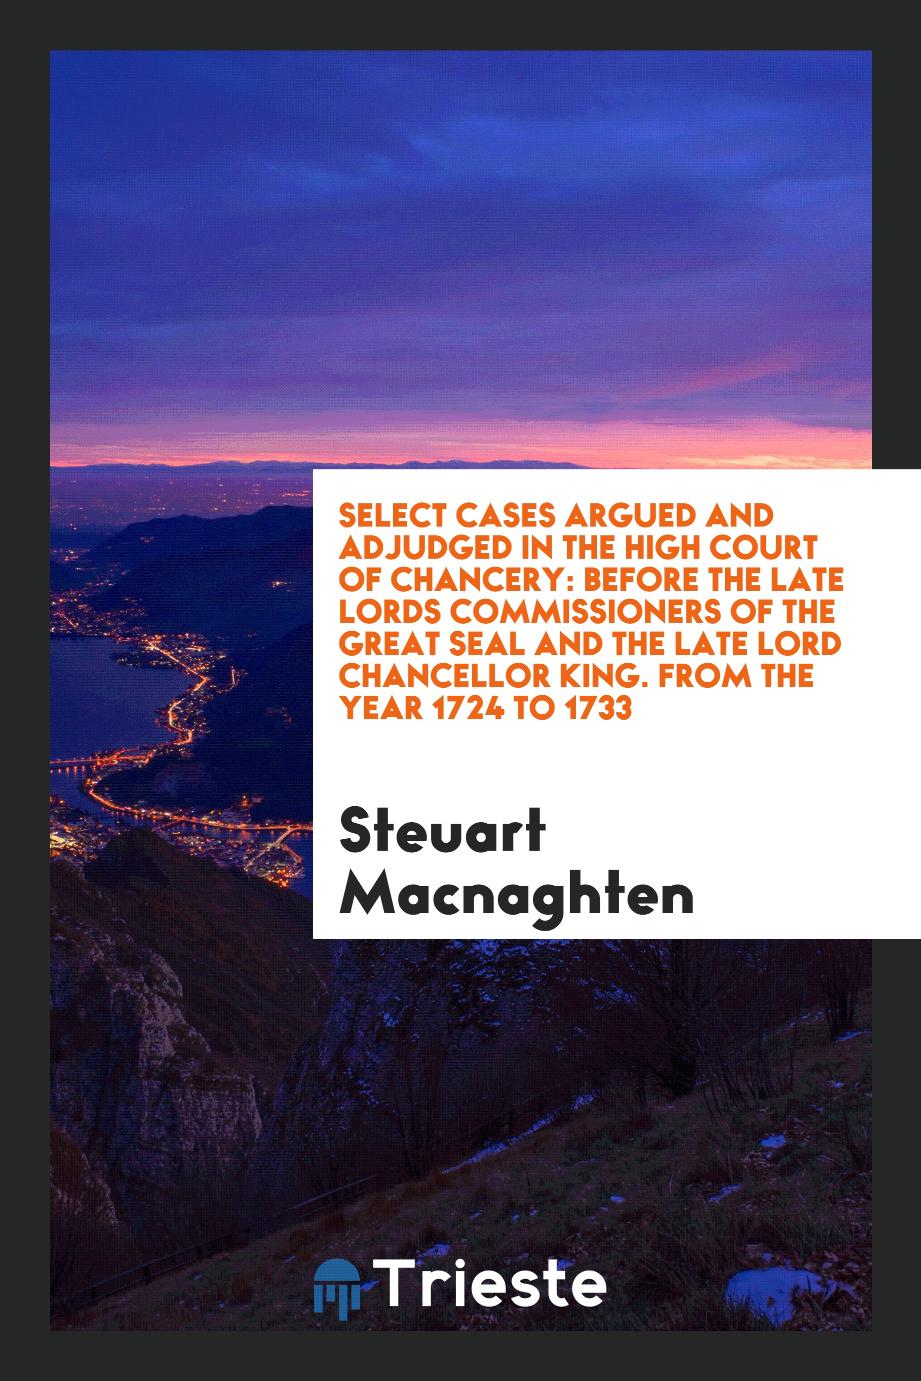 Select Cases Argued and Adjudged in the High Court of Chancery: Before the Late Lords Commissioners of the Great Seal and the Late Lord Chancellor King. From the Year 1724 to 1733